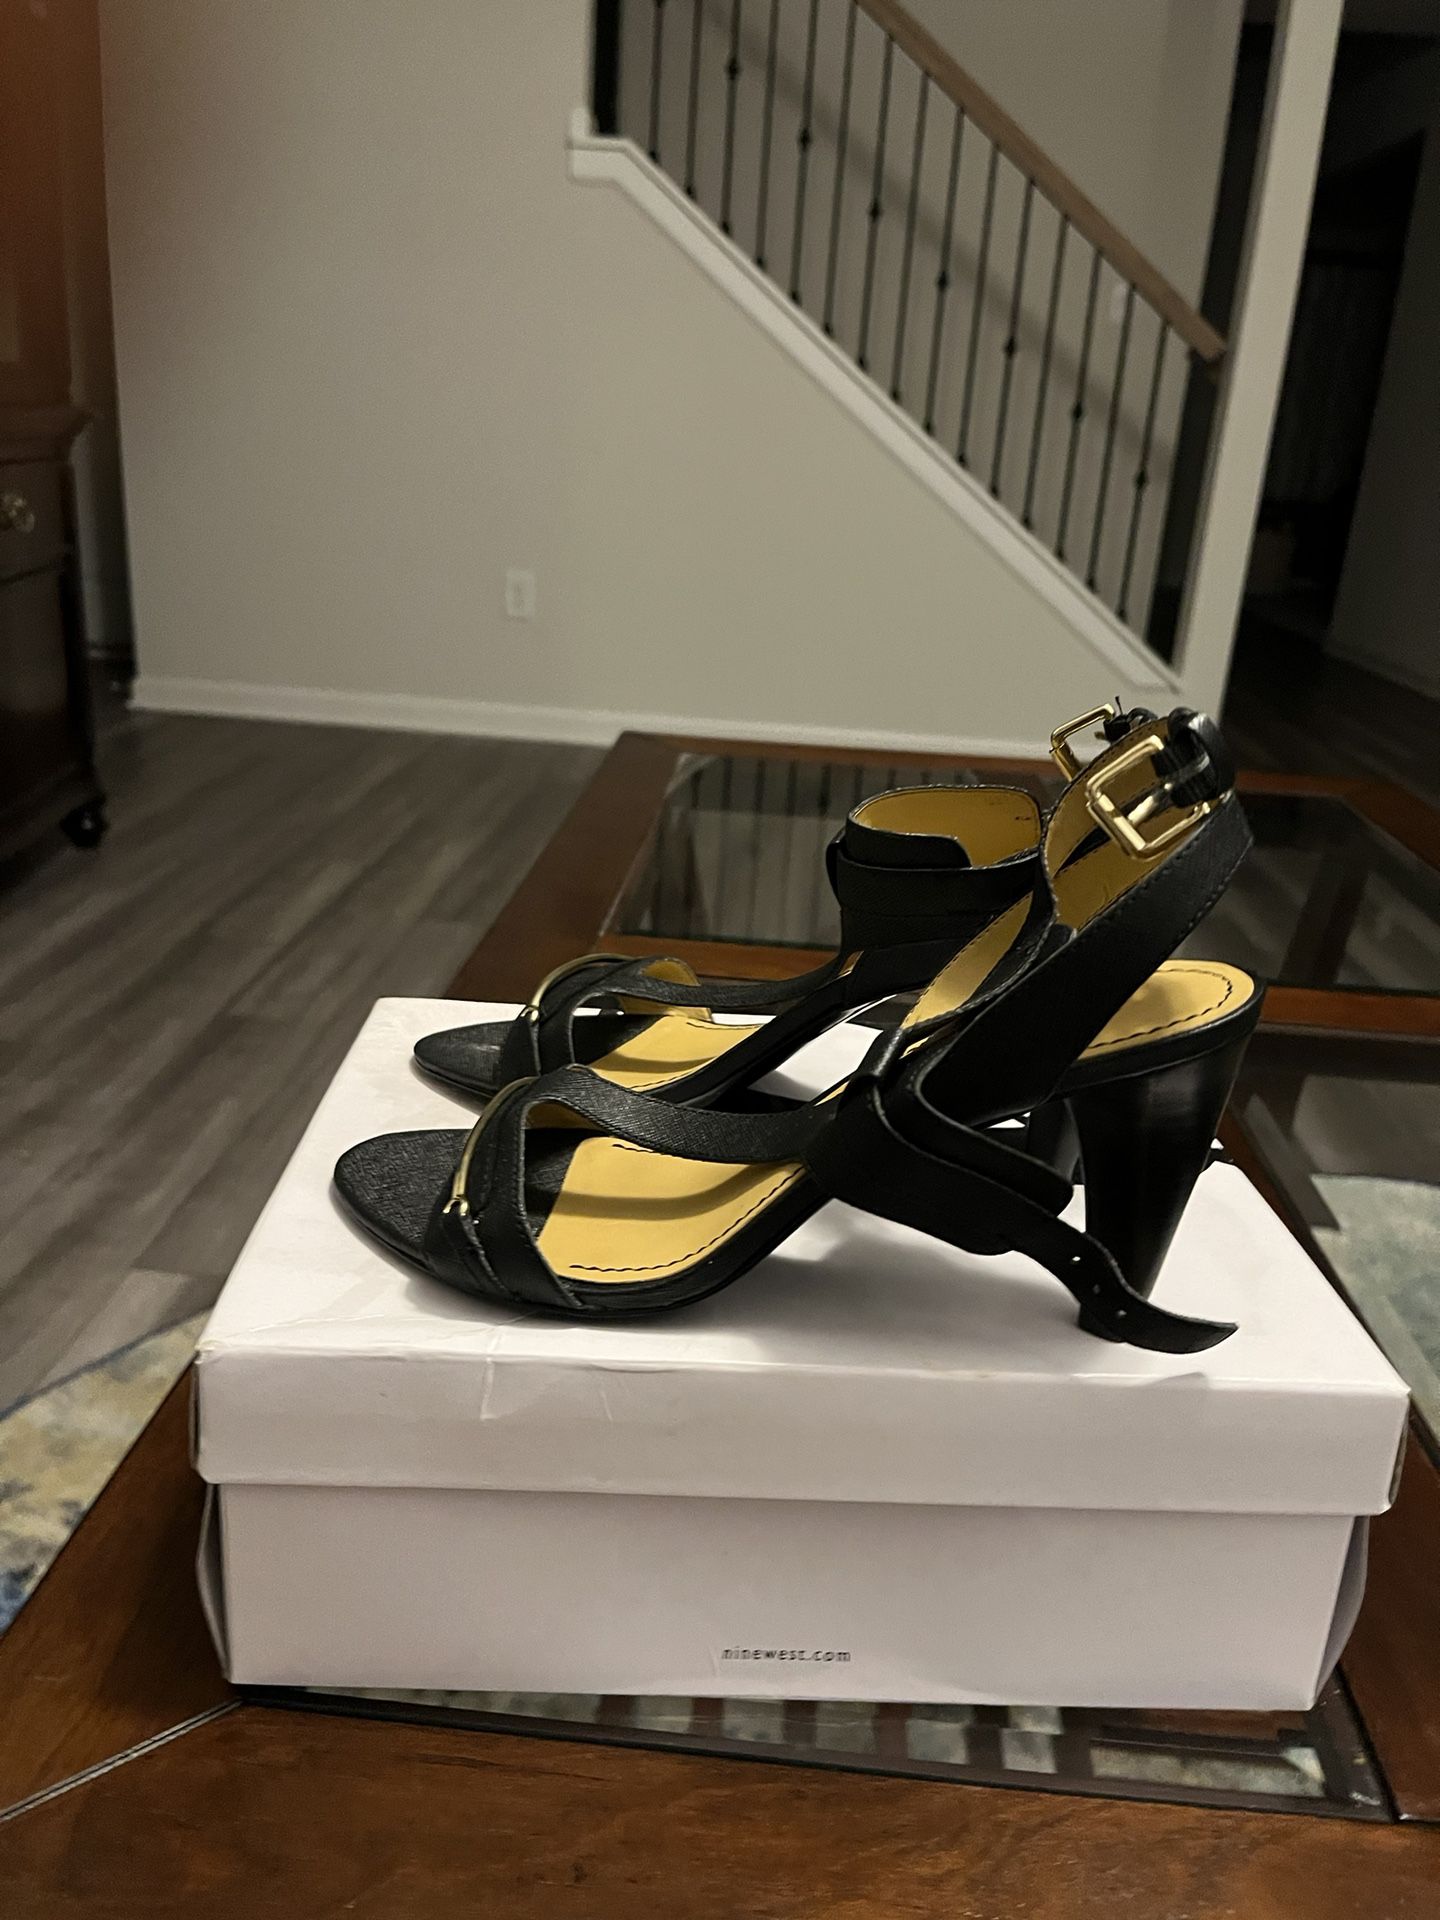 Brand new 9 West Shoes in Box 2 pairs black and beige/brown for $125,00